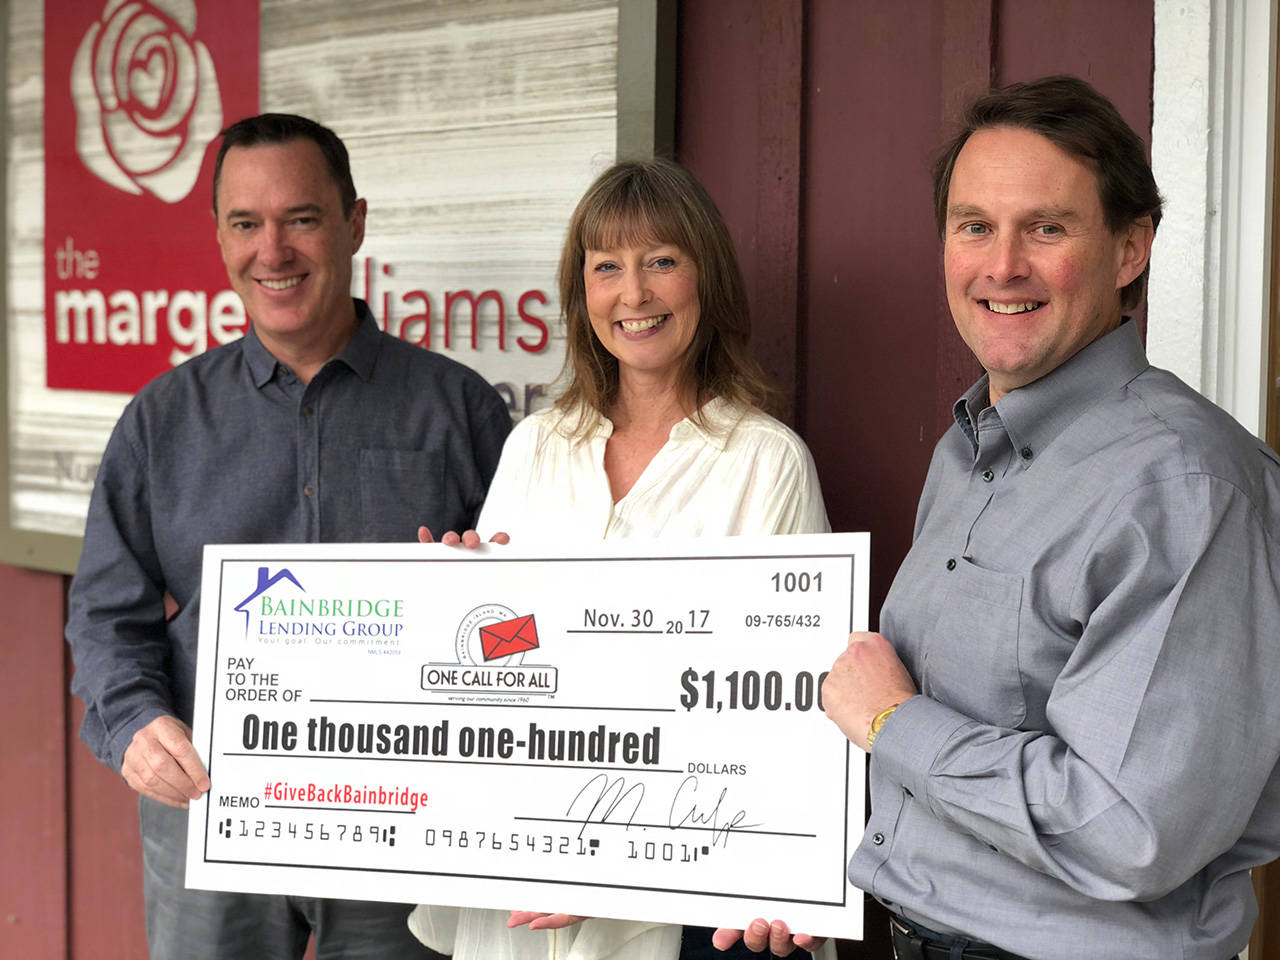 Matt Culp (right) along with fellow mortgage broker Tom Rees (left) presents Bainbridge Lending Group’s first quarterly check to support 9 local nonprofits as part of its #GiveBackBainbridge client-designated donation program to Tracey Peacoe Denlinger, executive director of One Call for All. (Photo courtesy of Bainbridge Lending Group)